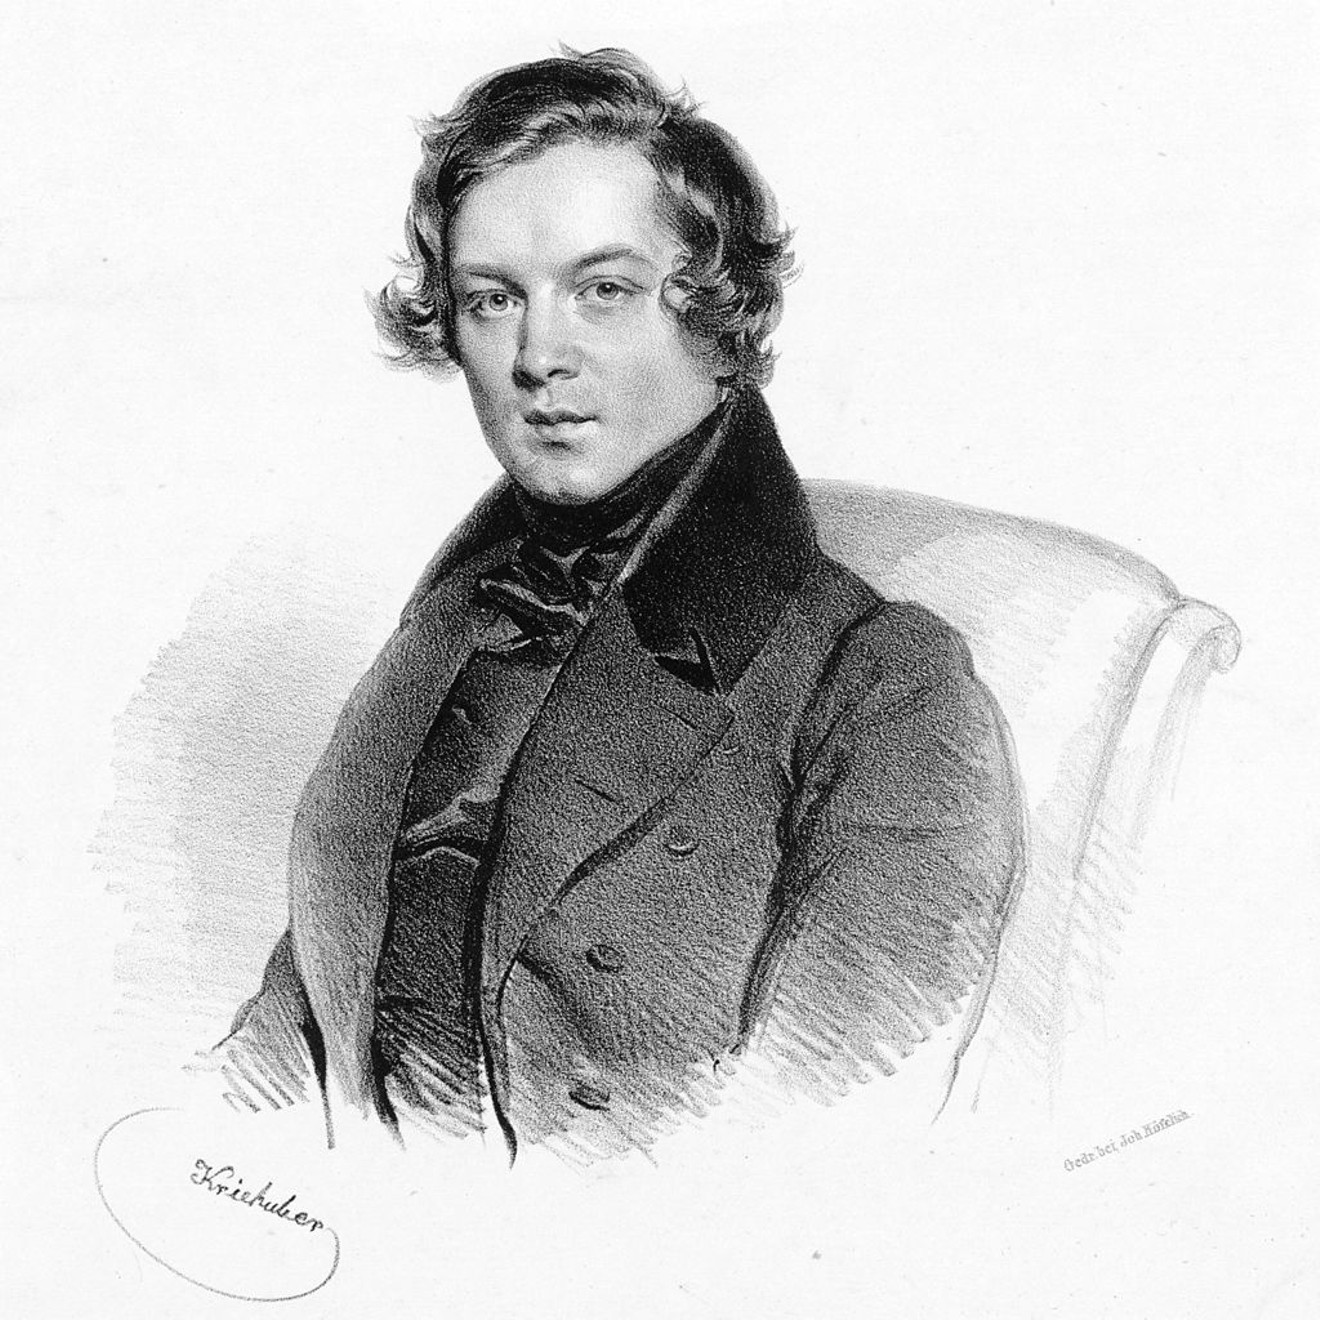 Robert Schumann's life was a roller coaster of success and plight. See how his music mirros his personal life during the Houston Symphony's Schumann Festival: Angels and Demons.